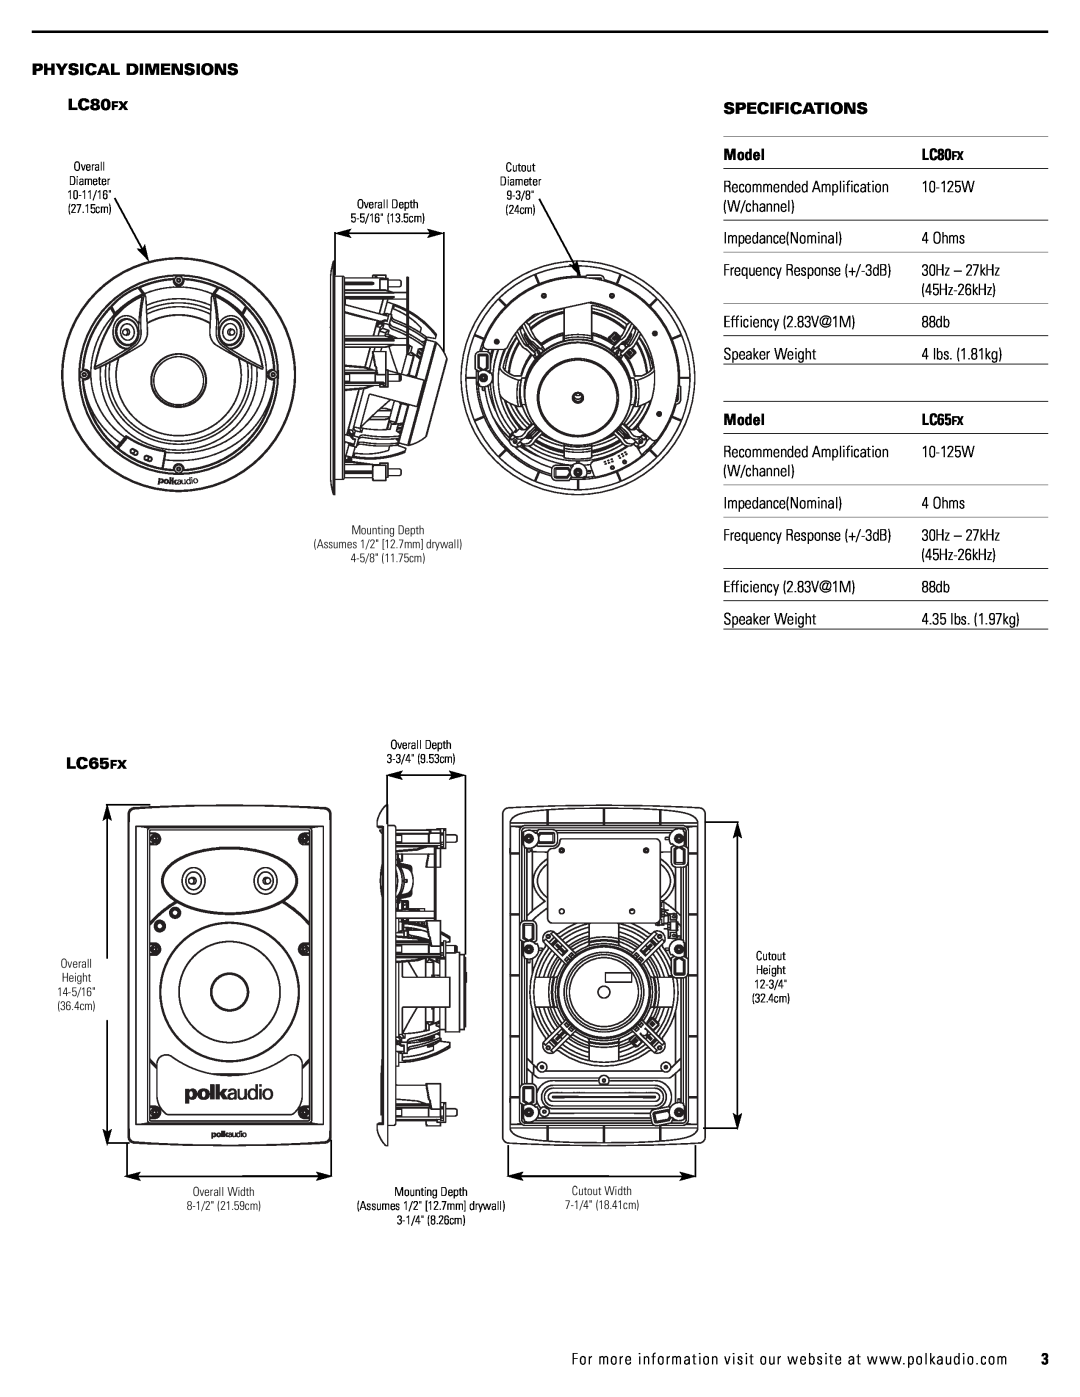 Polk Audio LC65FX owner manual PHYSICAL DIMENSIONS LC80FX, Specifications, Model 